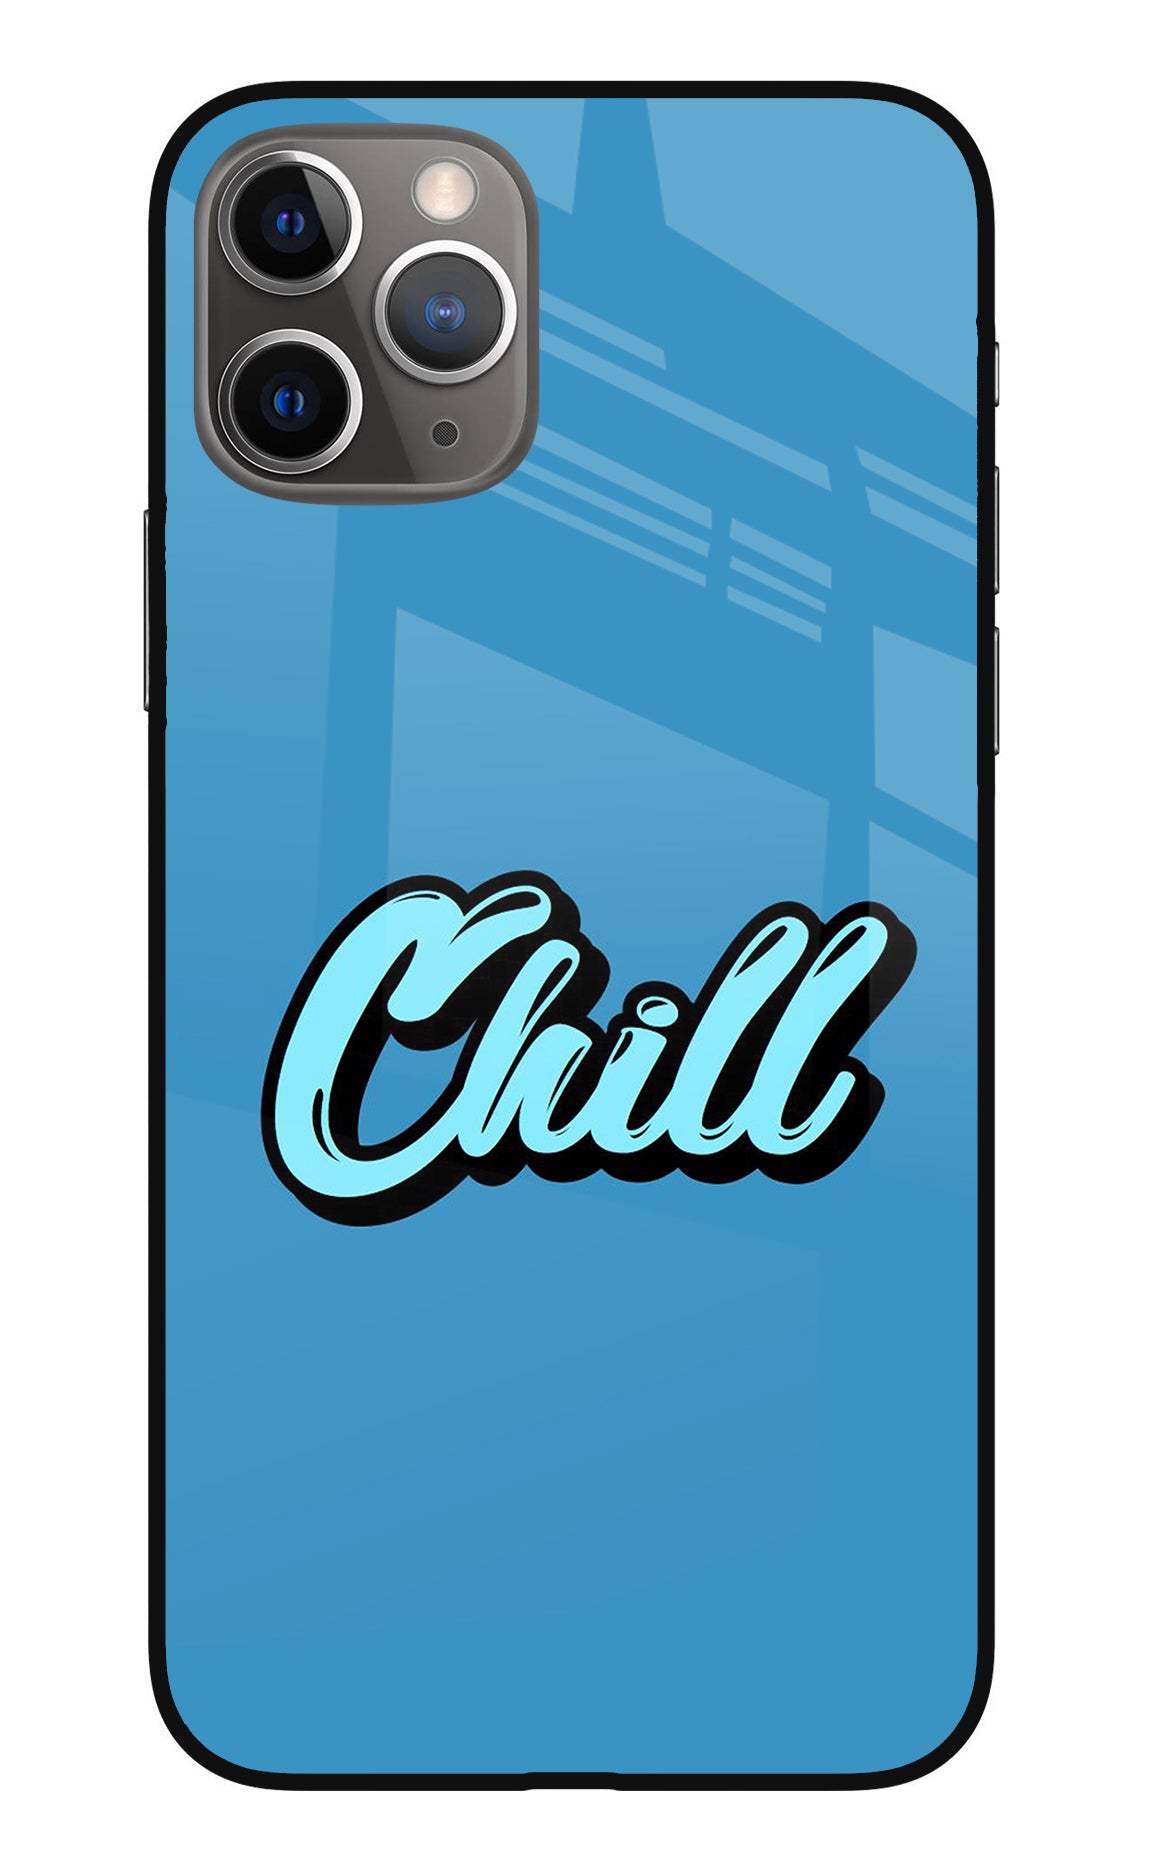 Chill iPhone 11 Pro Max Back Cover